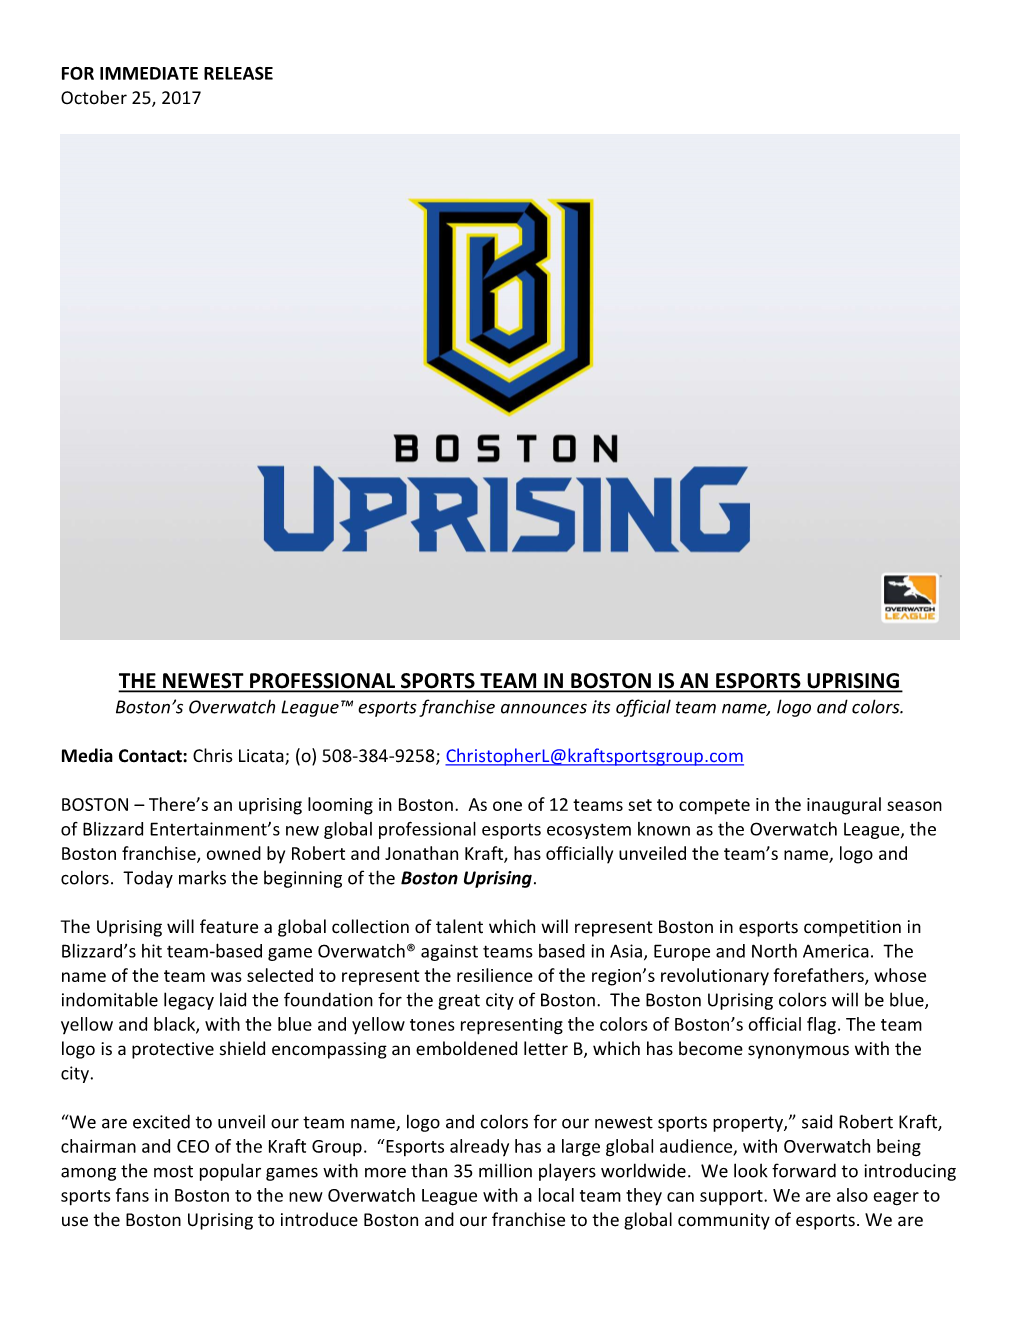 THE NEWEST PROFESSIONAL SPORTS TEAM in BOSTON IS an ESPORTS UPRISING Boston’S Overwatch League™ Esports Franchise Announces Its Official Team Name, Logo and Colors